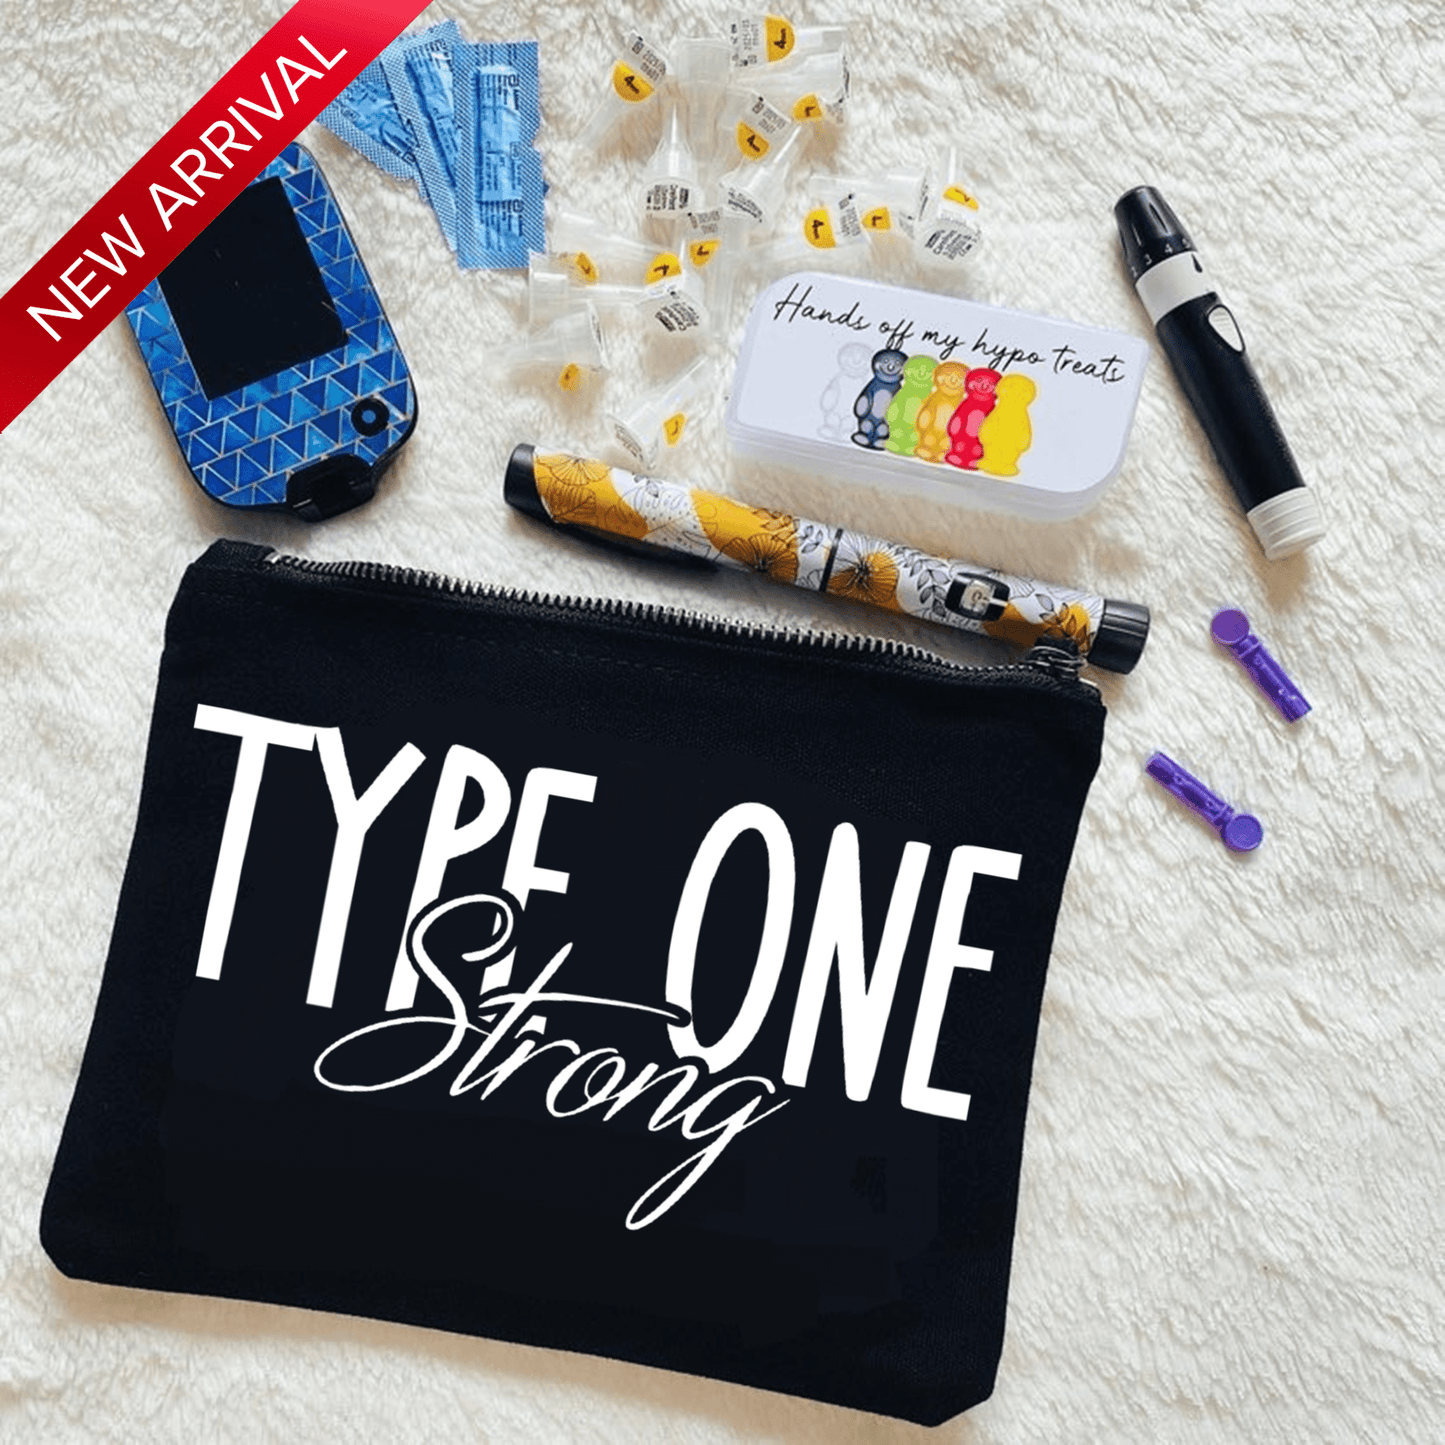 Type One Strong - Kit Bag